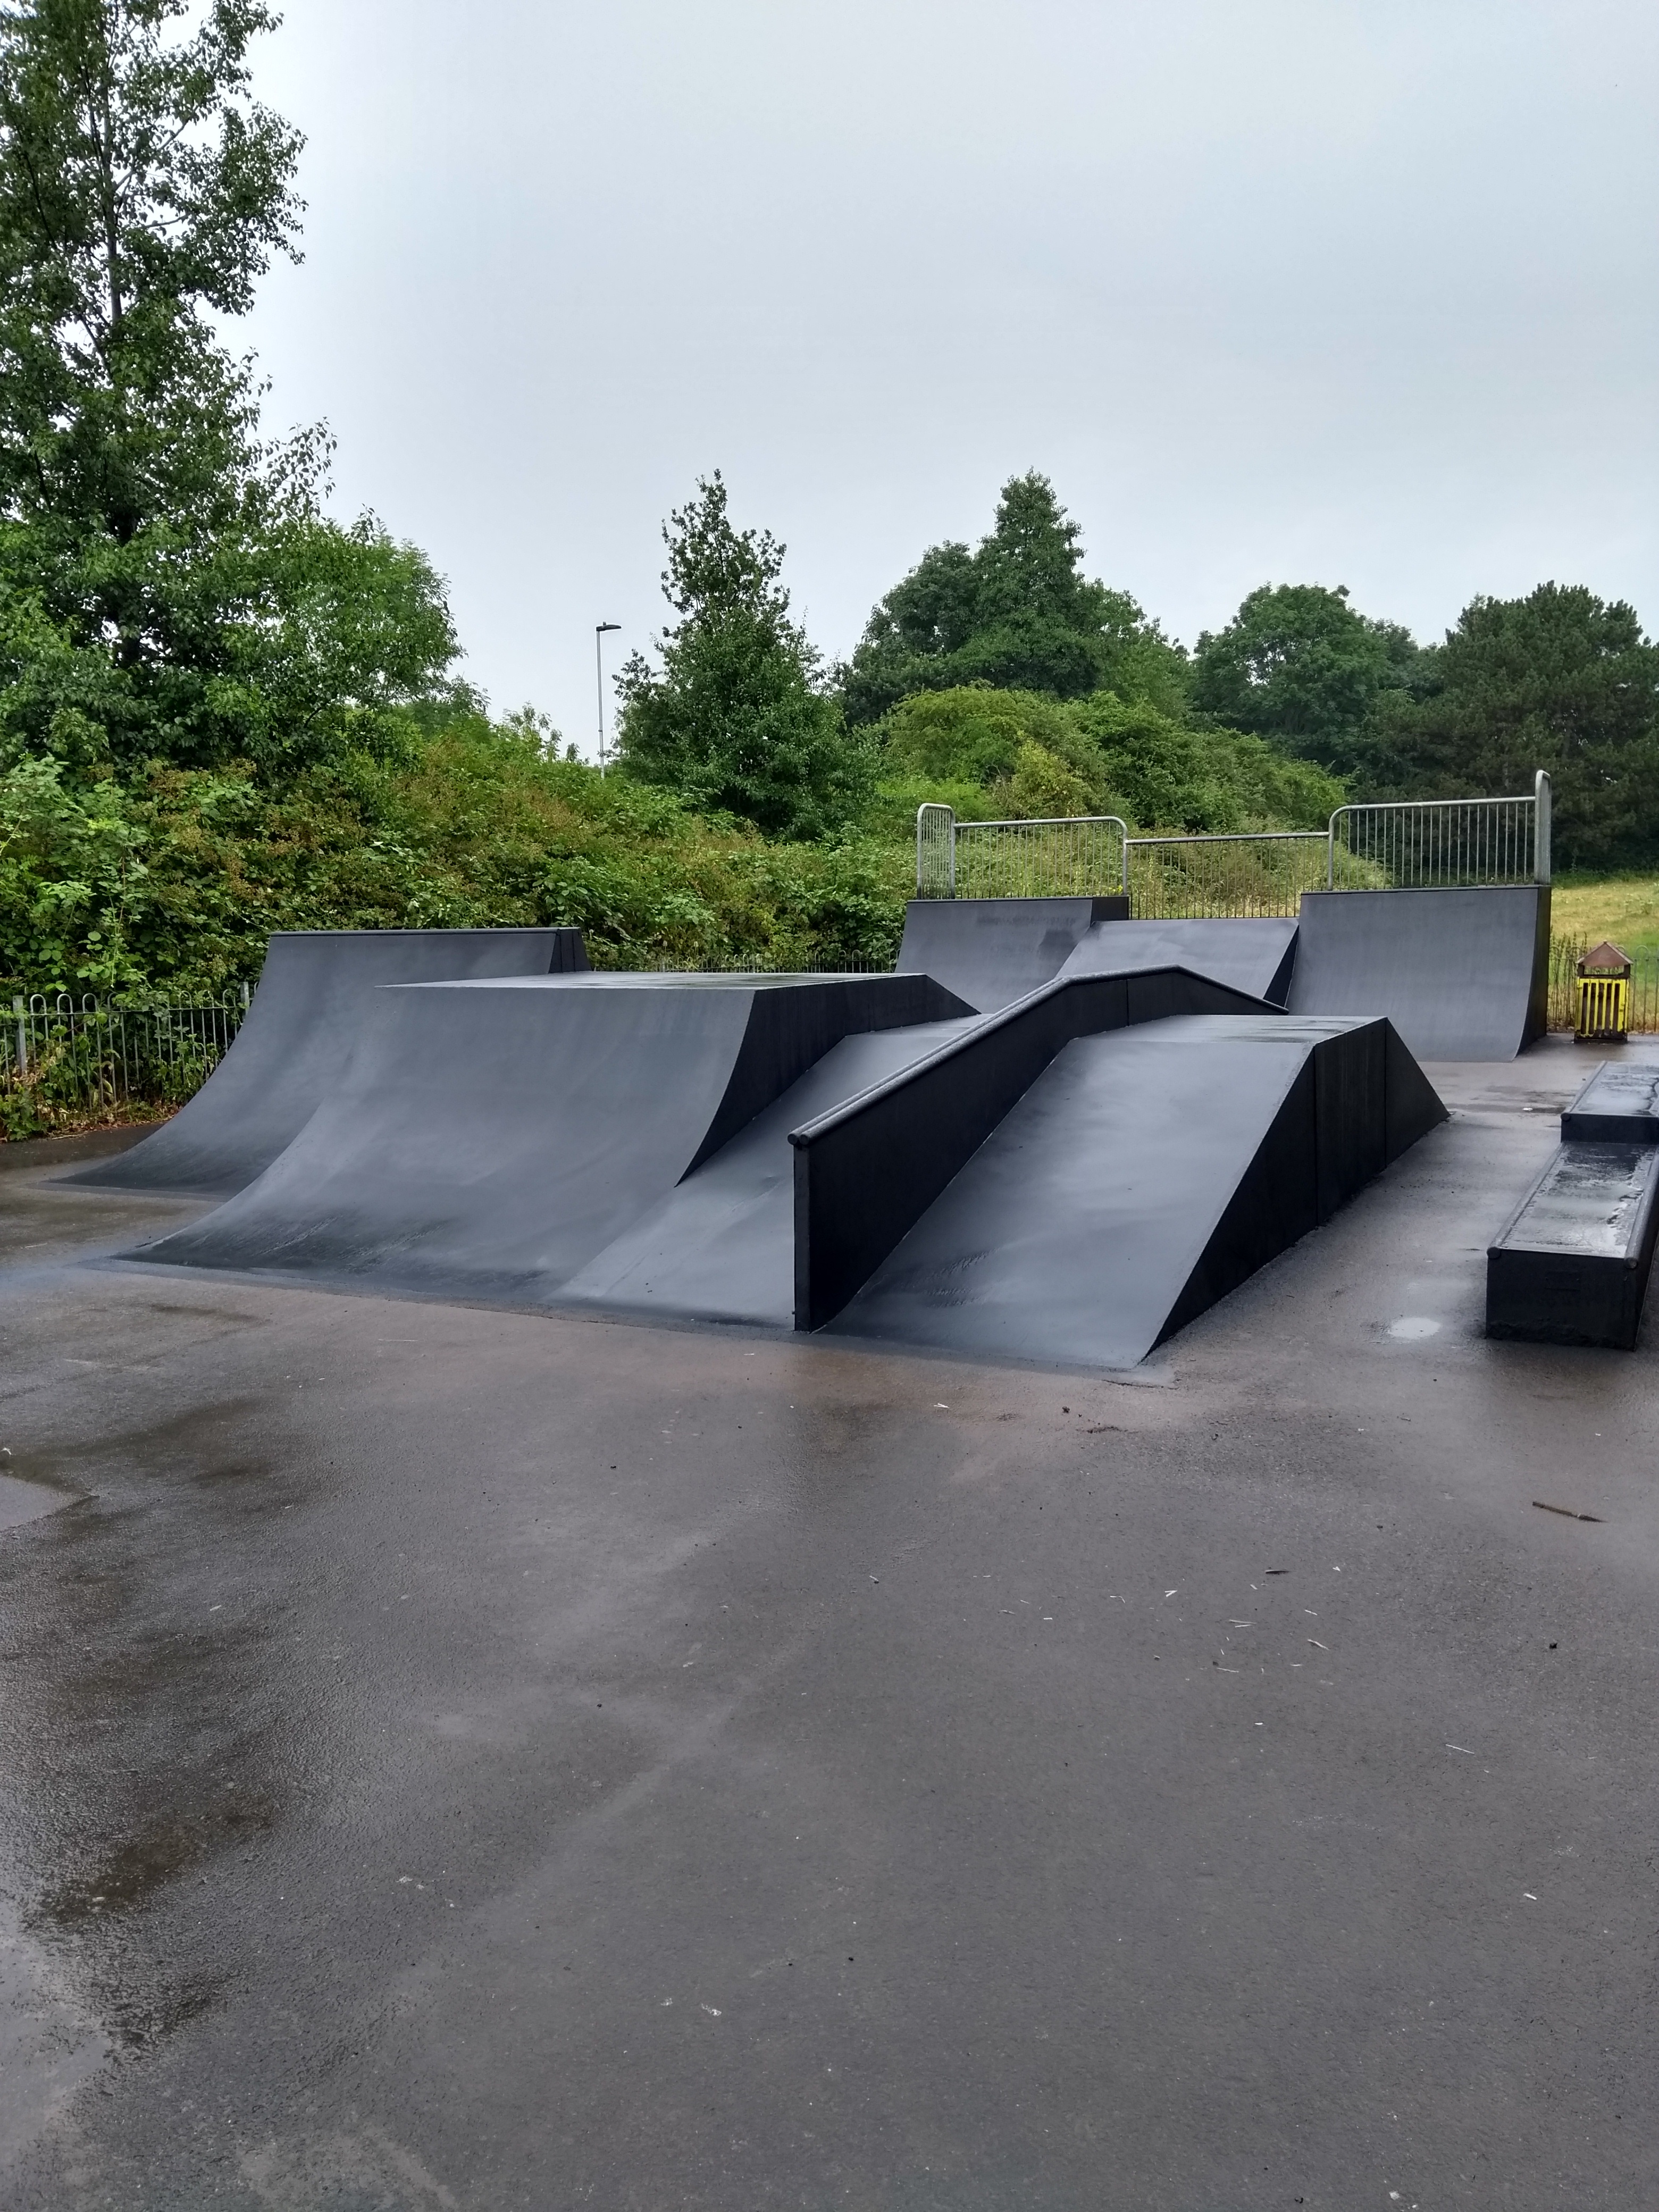 A view of the funbox combination in the centre of the skate park and the Streetbench next to it.